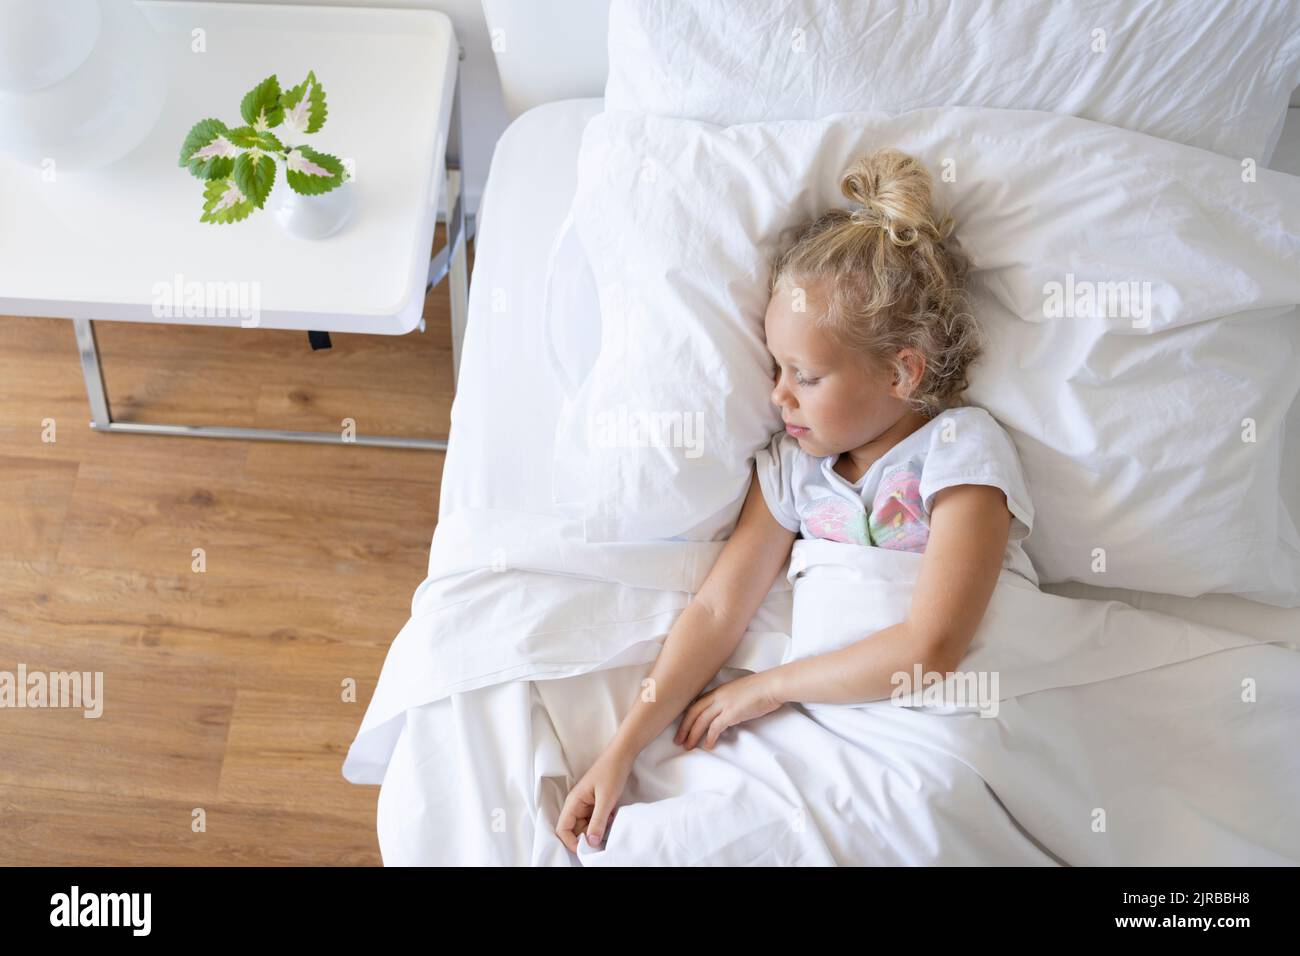 Blonde girl sleeping in bed Banque D'Images